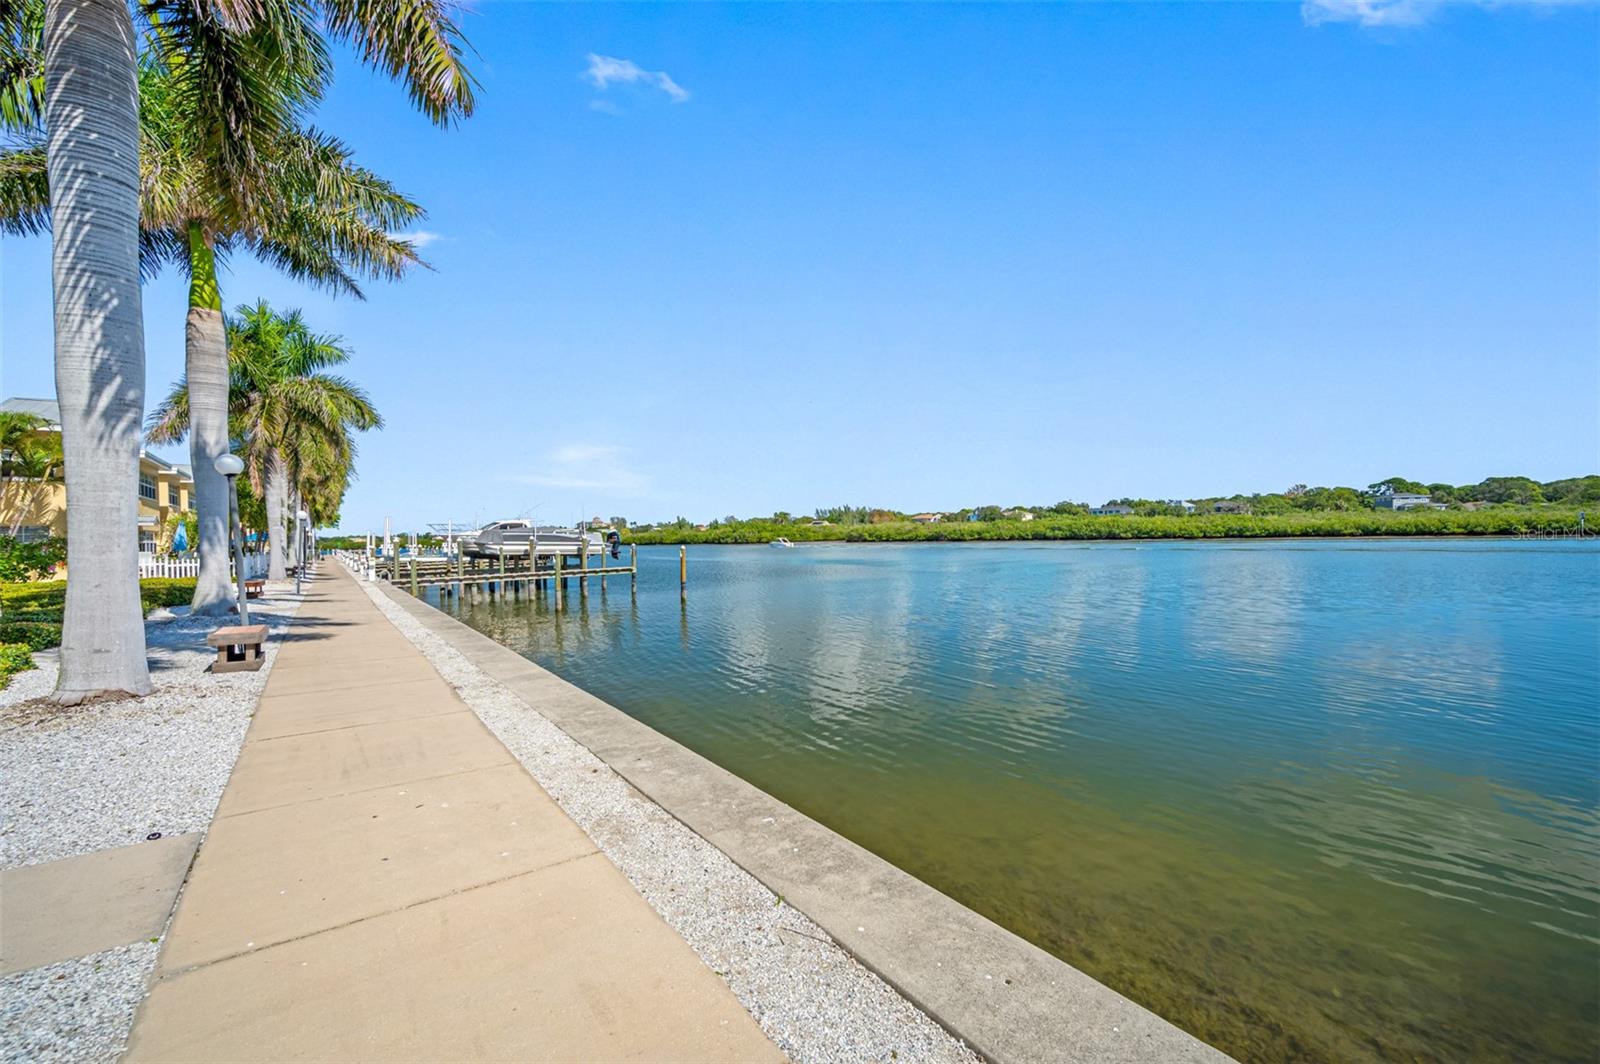 Over 400 Ft of Seawall on the Intracoastal with walking path